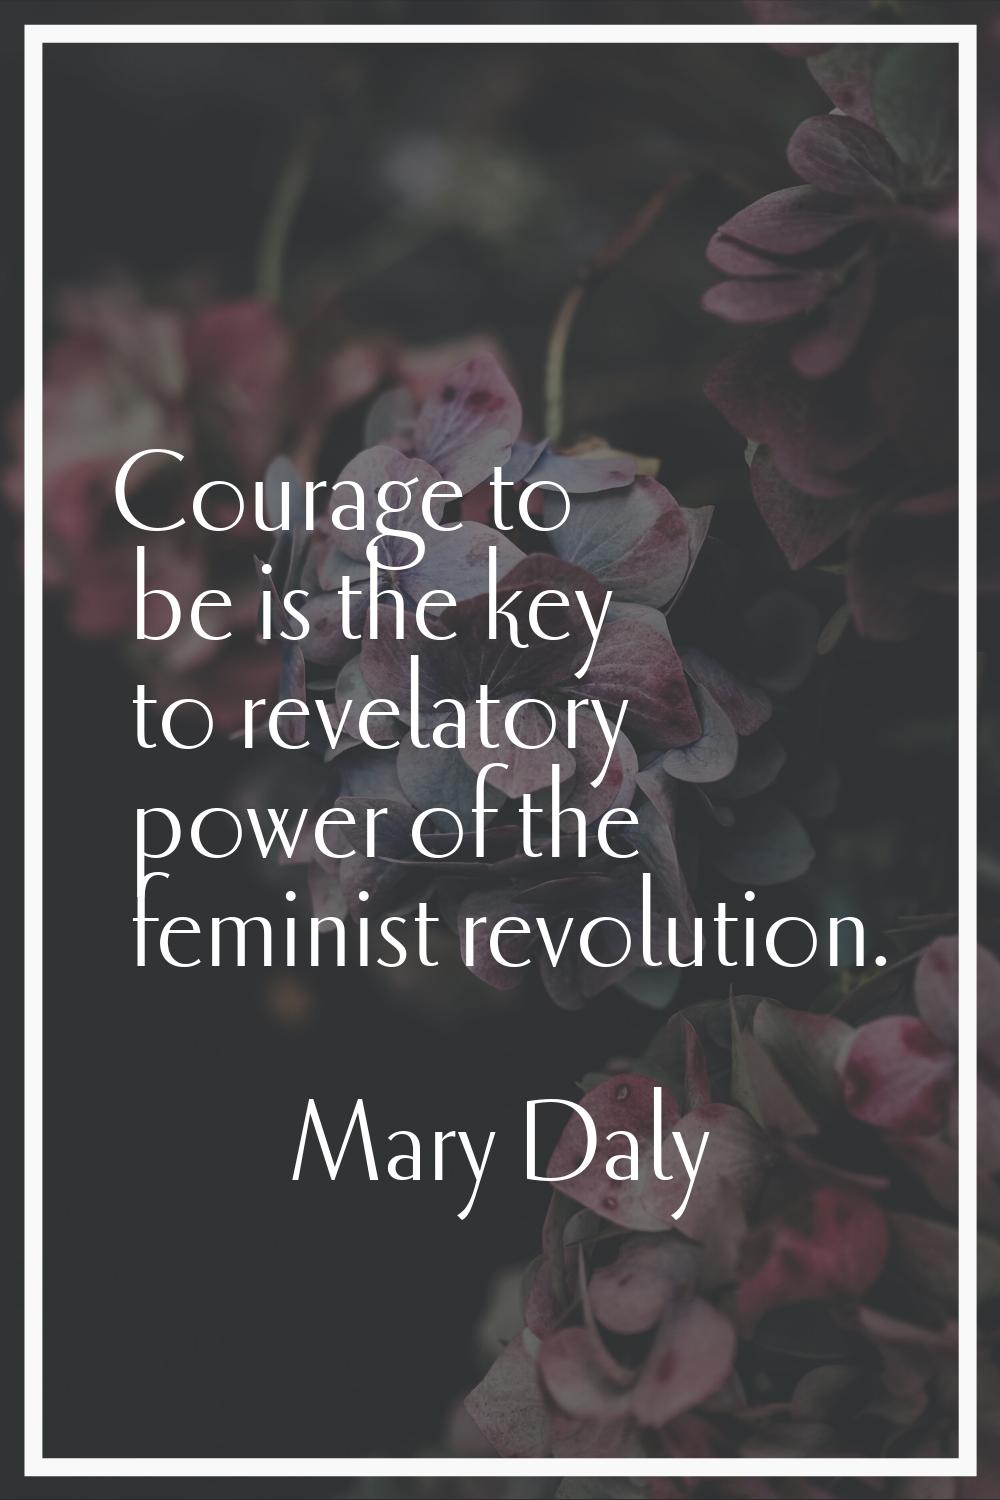 Courage to be is the key to revelatory power of the feminist revolution.